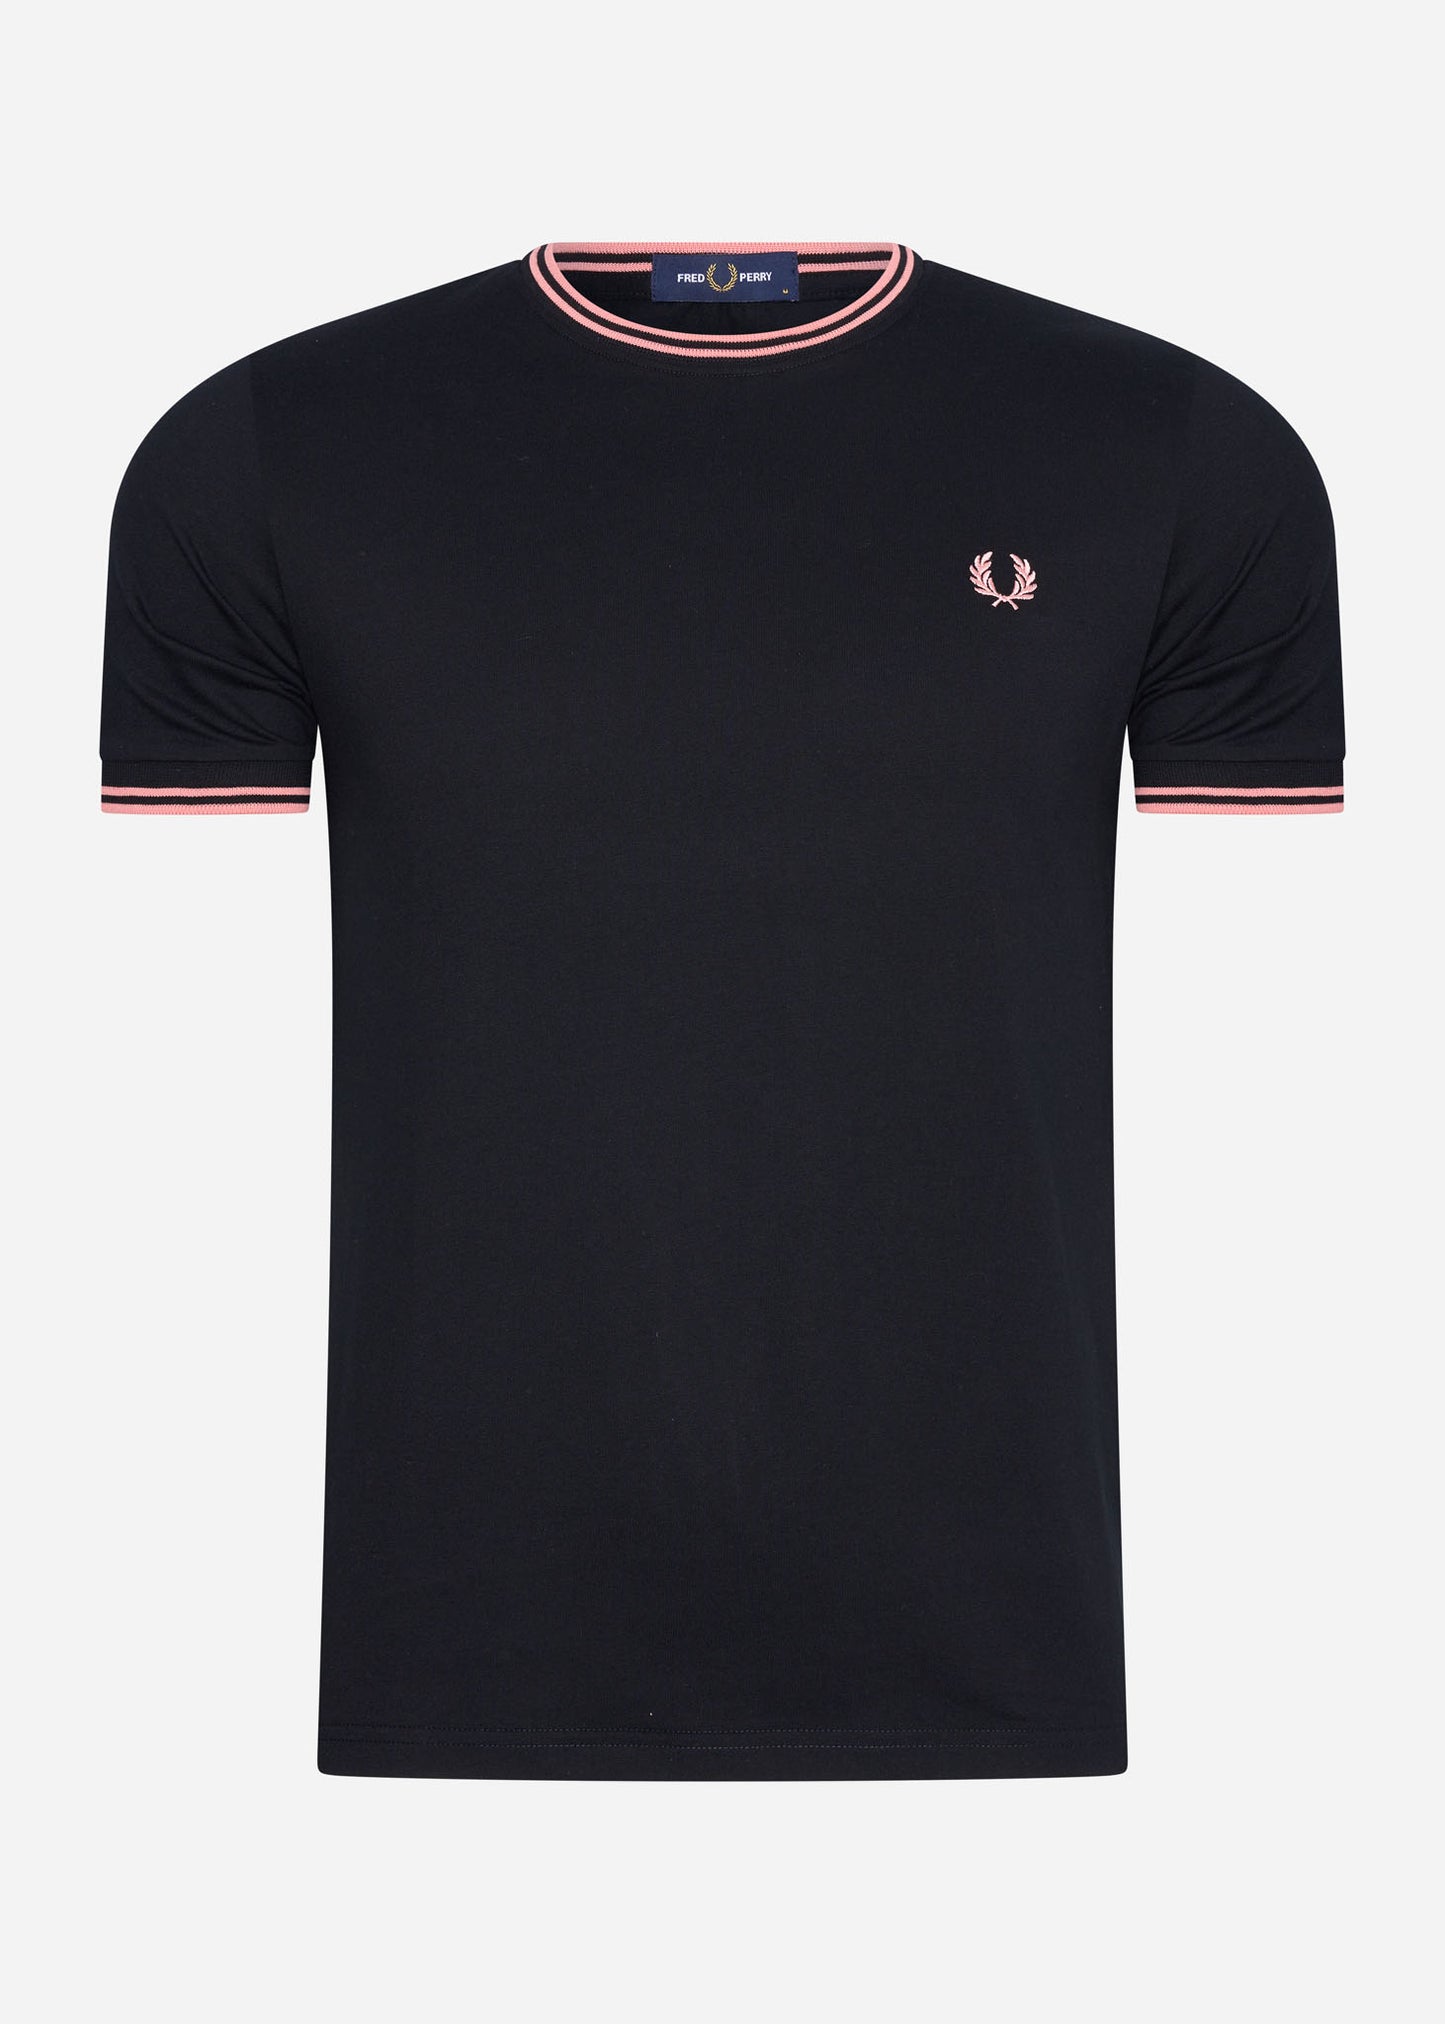 Fred Perry T-shirts  Twin tipped t-shirt - black pink peach 